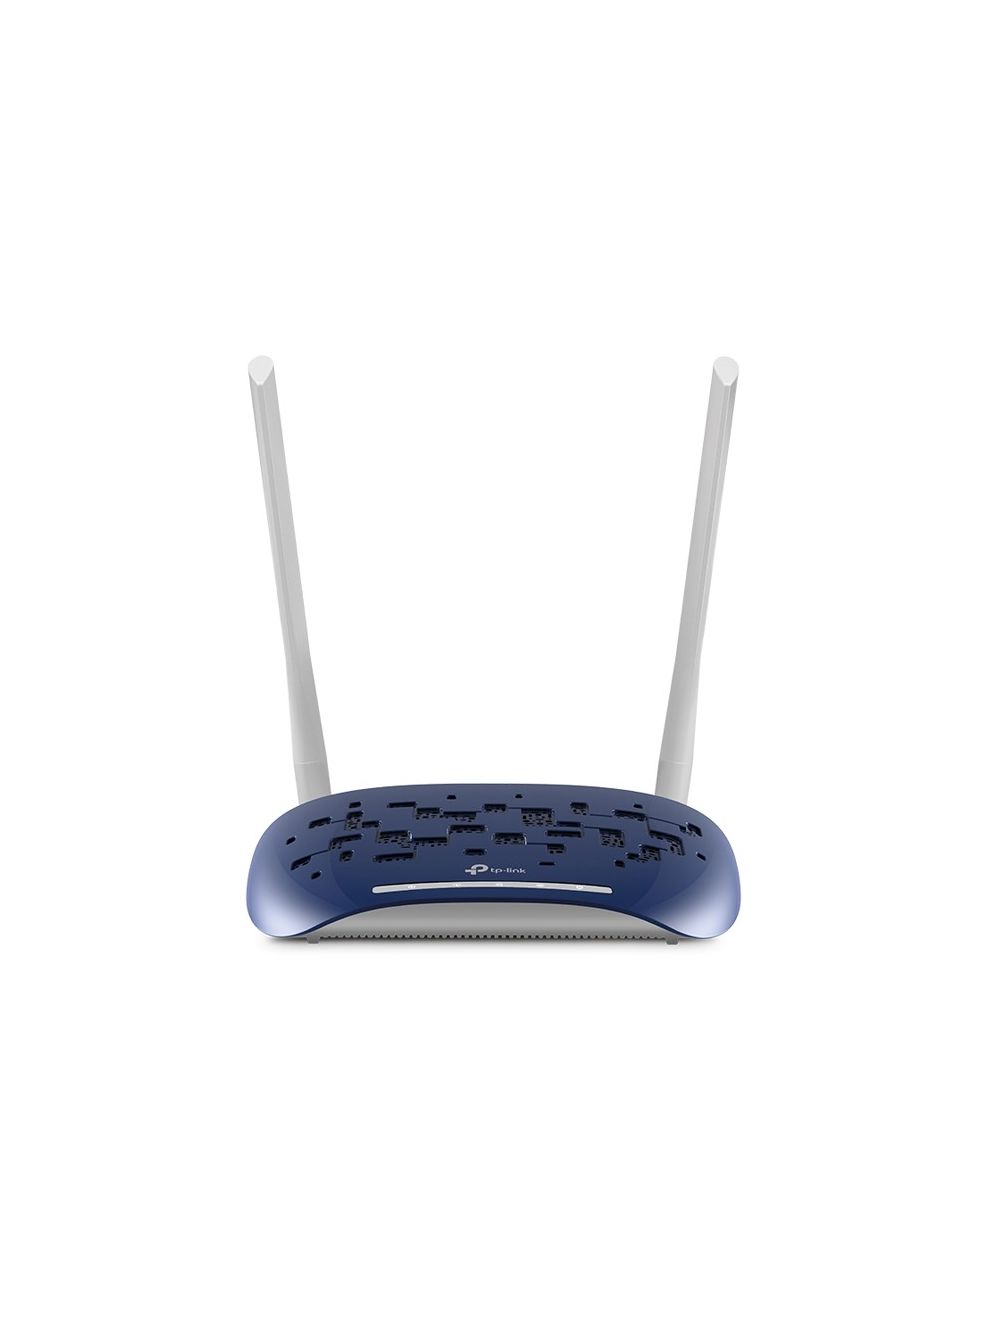 Tp-Link 300Mbps Wireless N Router